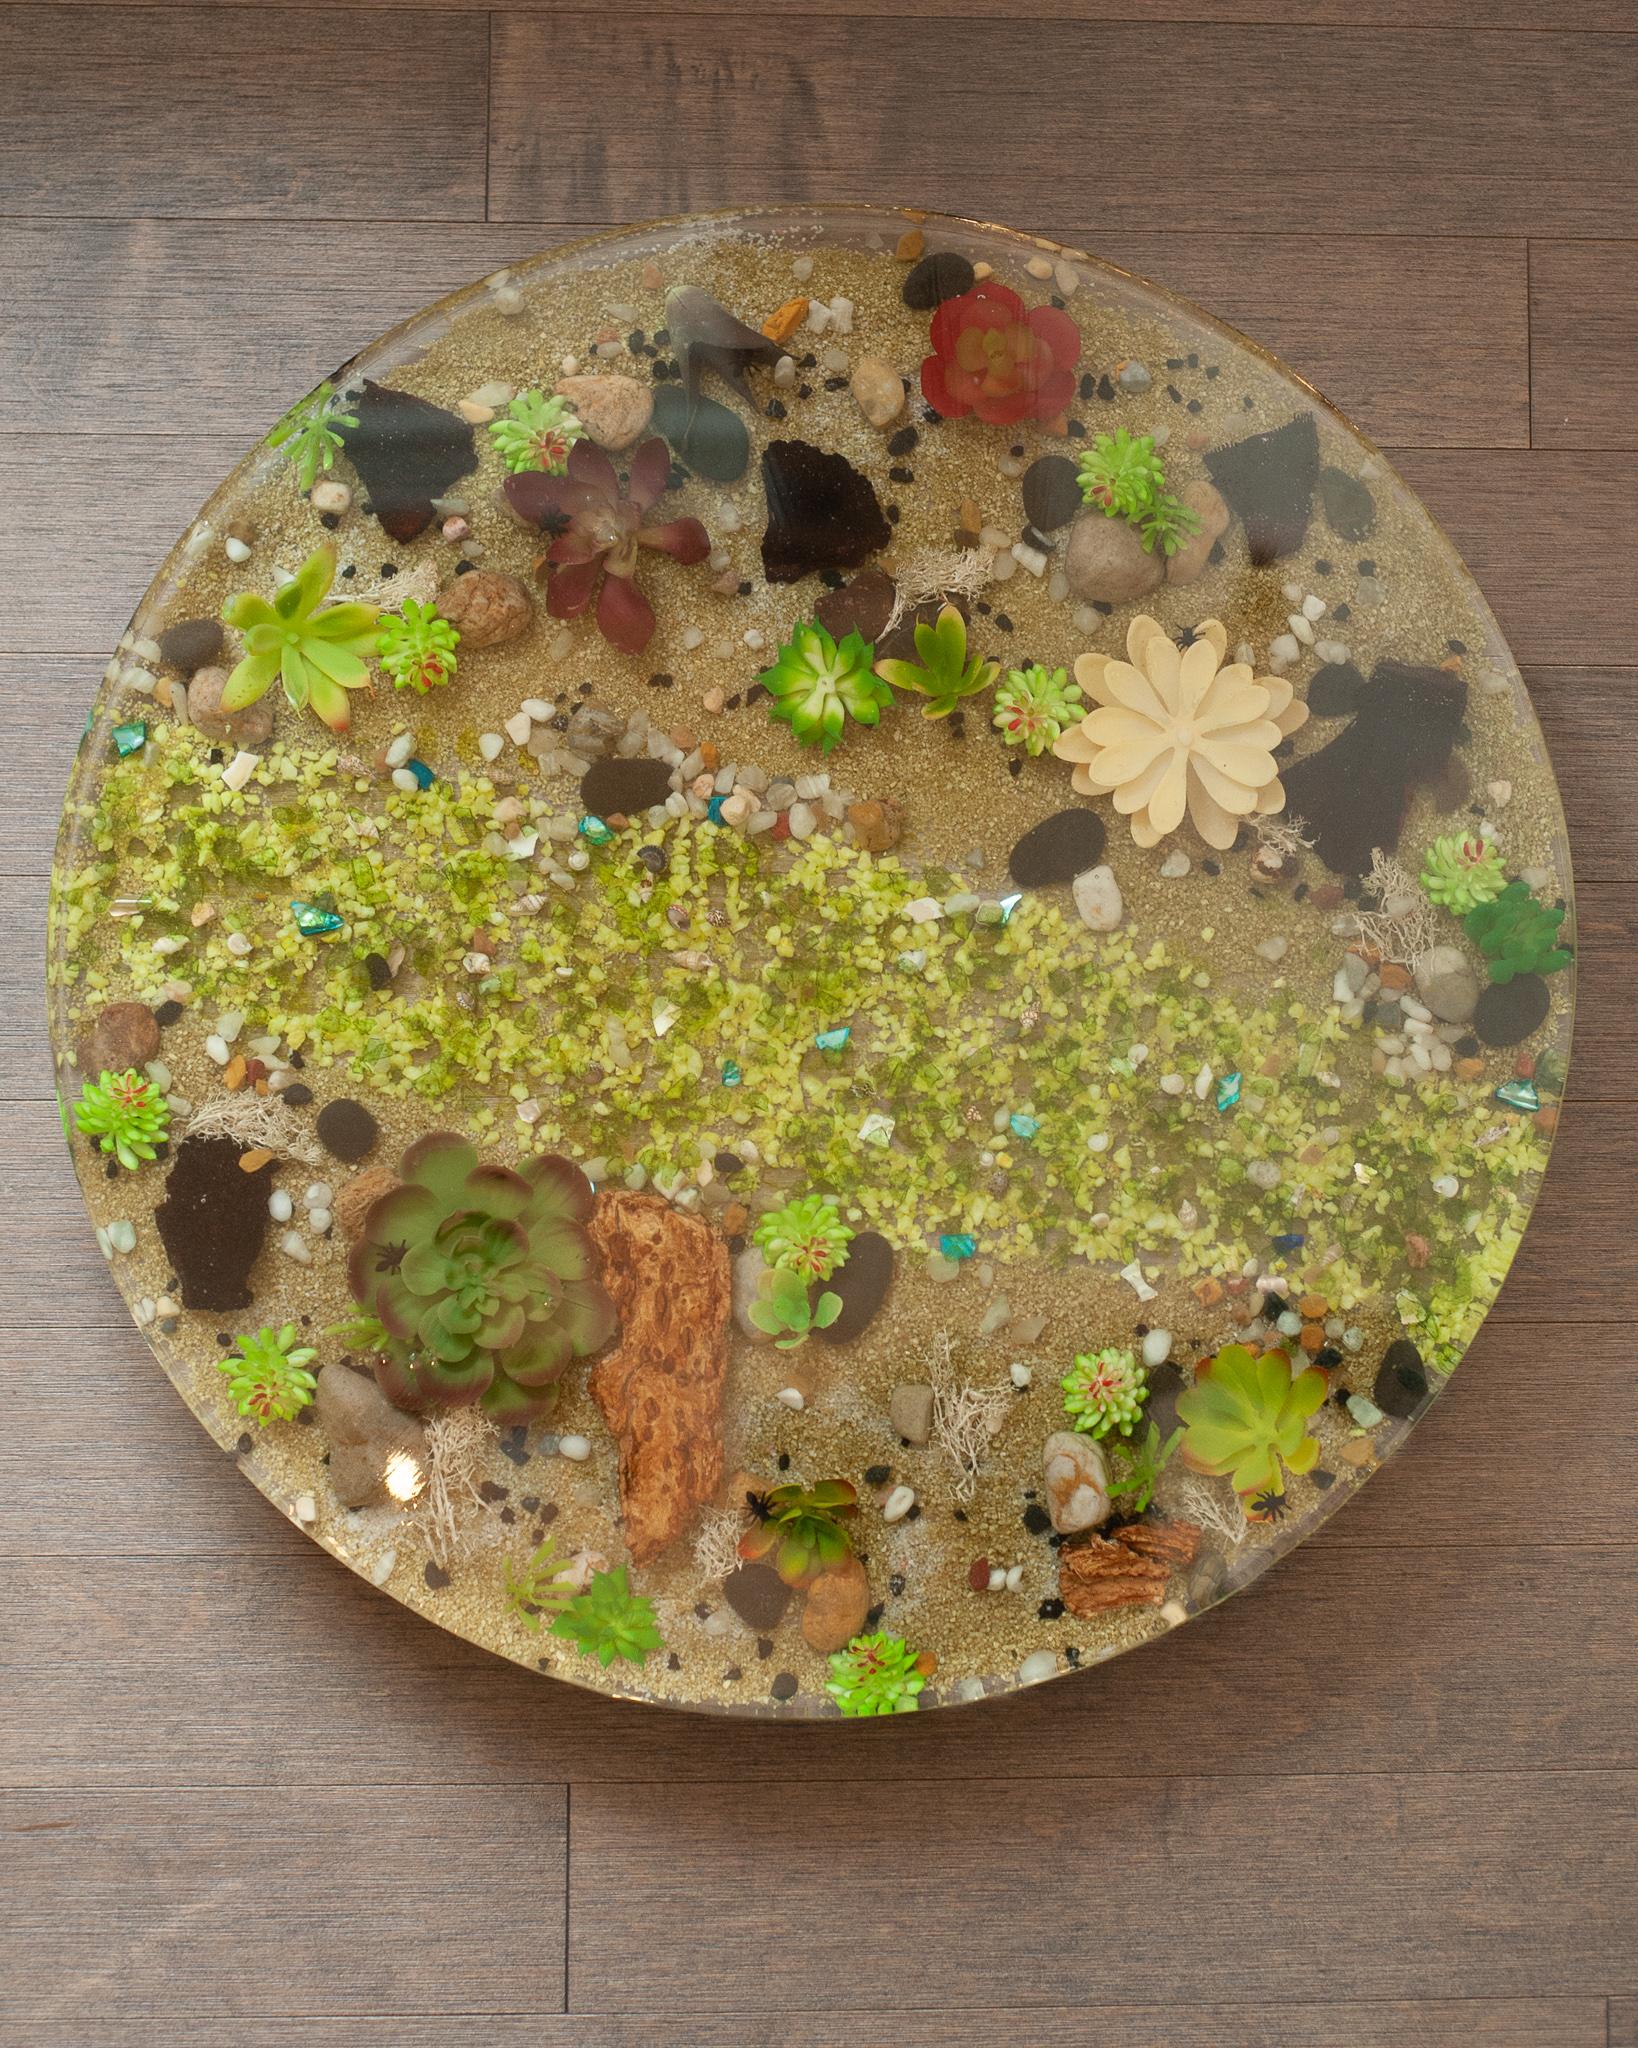 A beautiful large cake serving plate made from poured acrylic with captured faux plants. This thick acrylic plate will enhance any confection placed on top and make for a wonderful serving accessory.